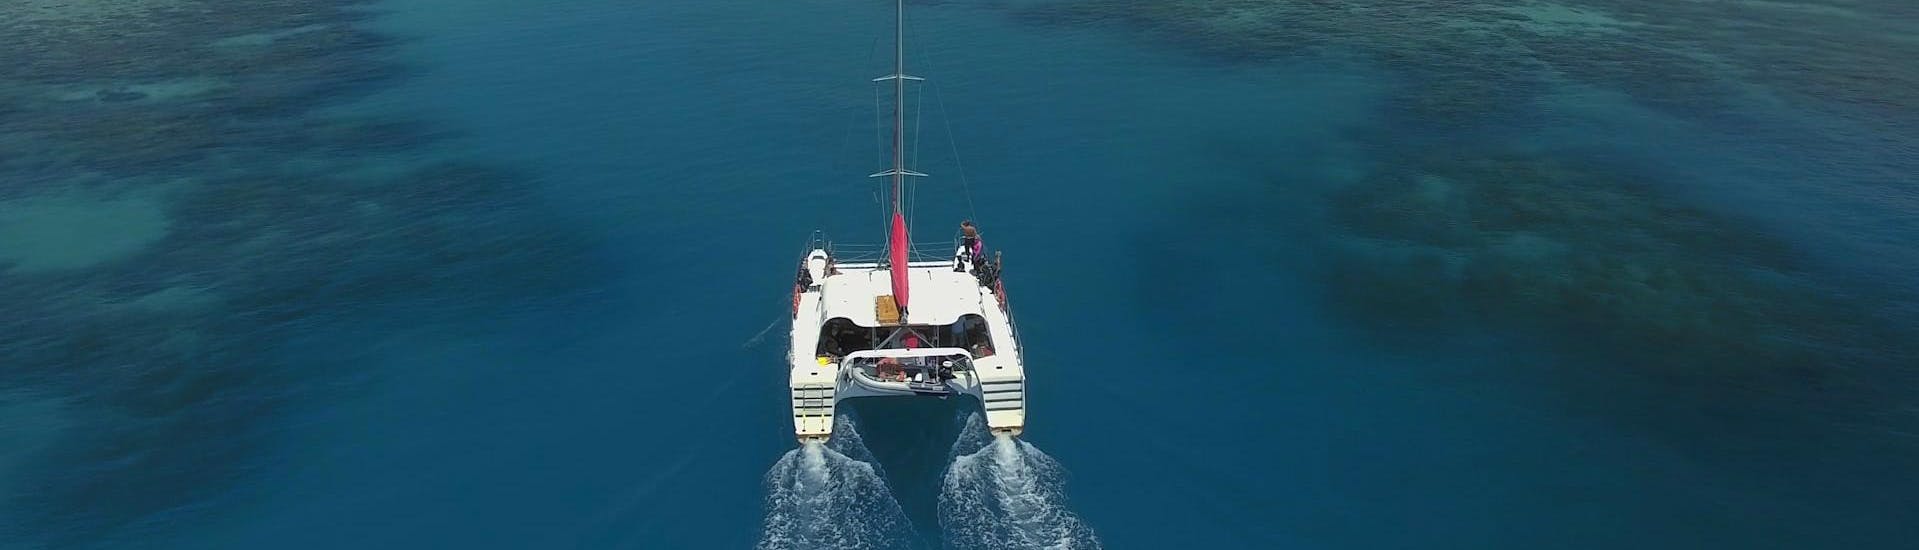 The catamaran Reef Daytripper Cairns is heading towards Upolu Reef during the Great Barrier Reef Diving Trip - Introductory Dive offer.